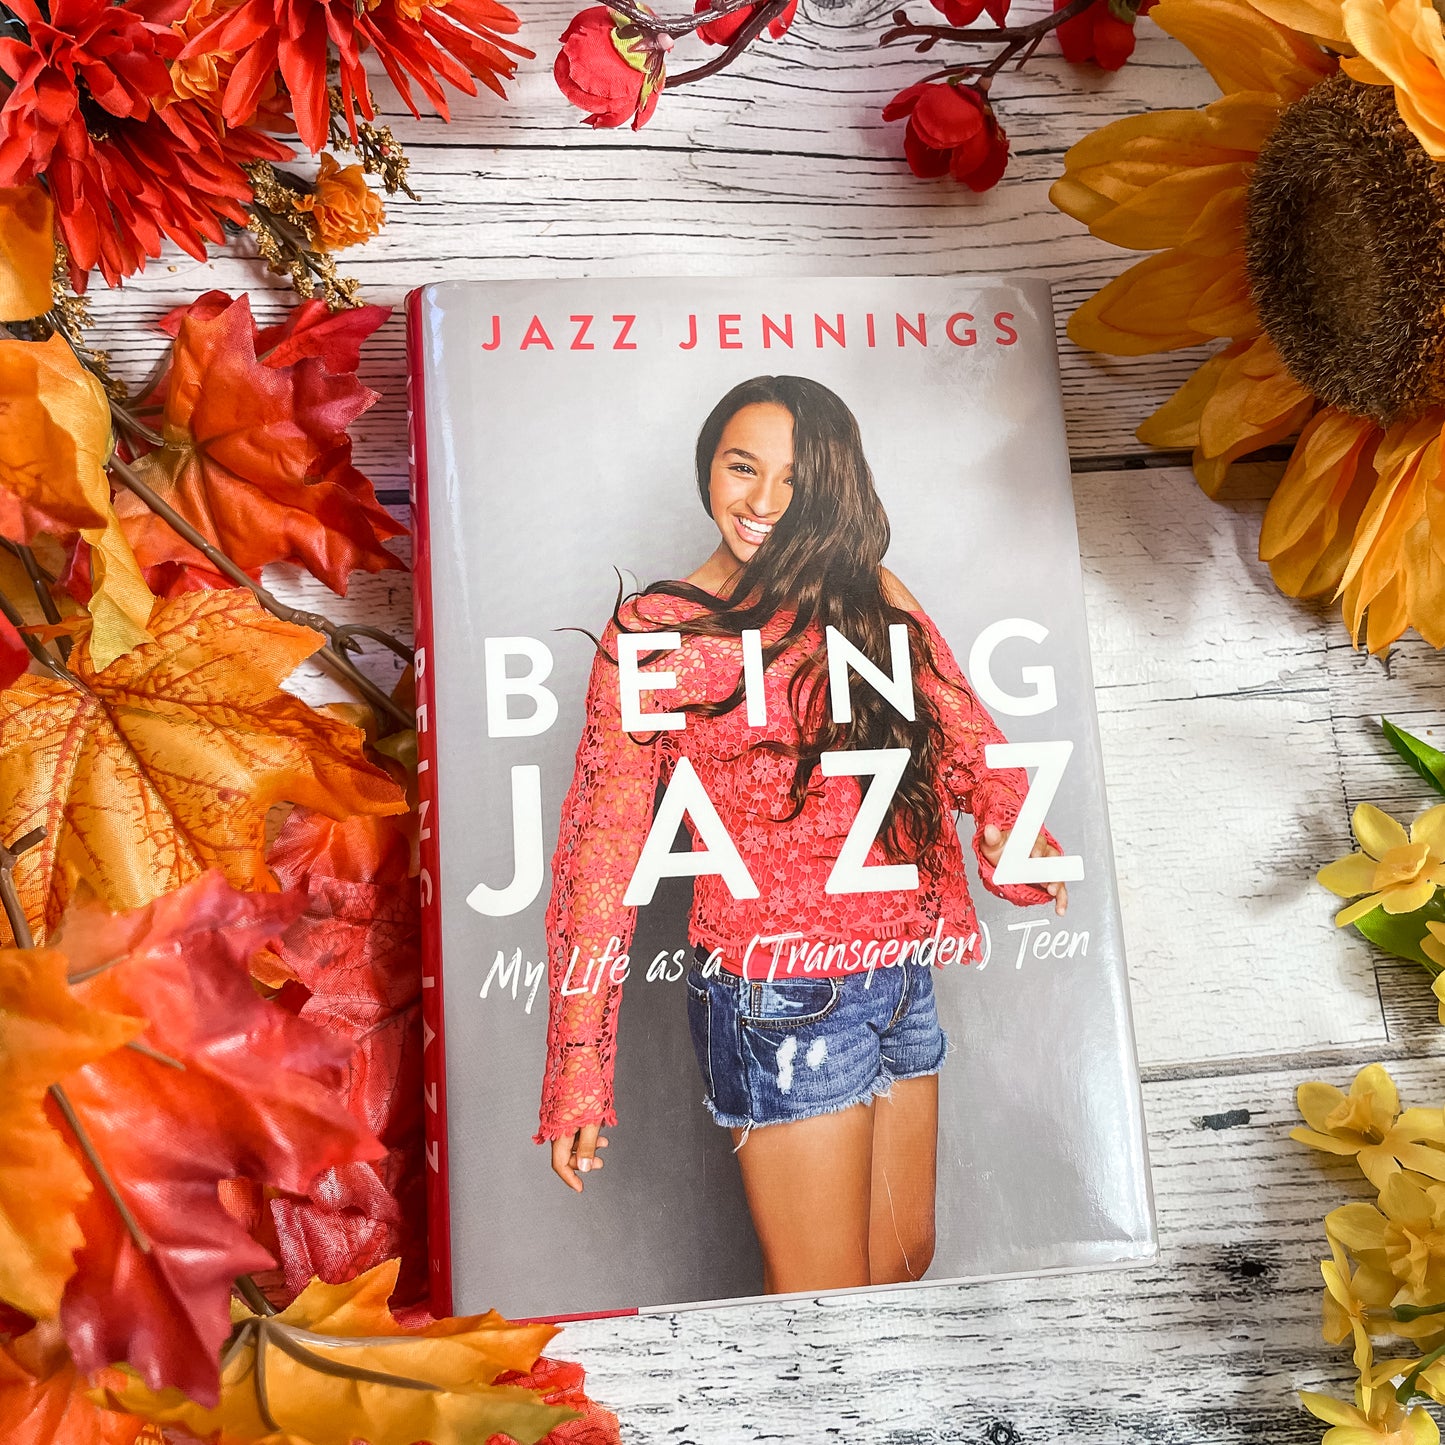 Being Jazz: My Life as a Transgender Teen by Jazz Jennings